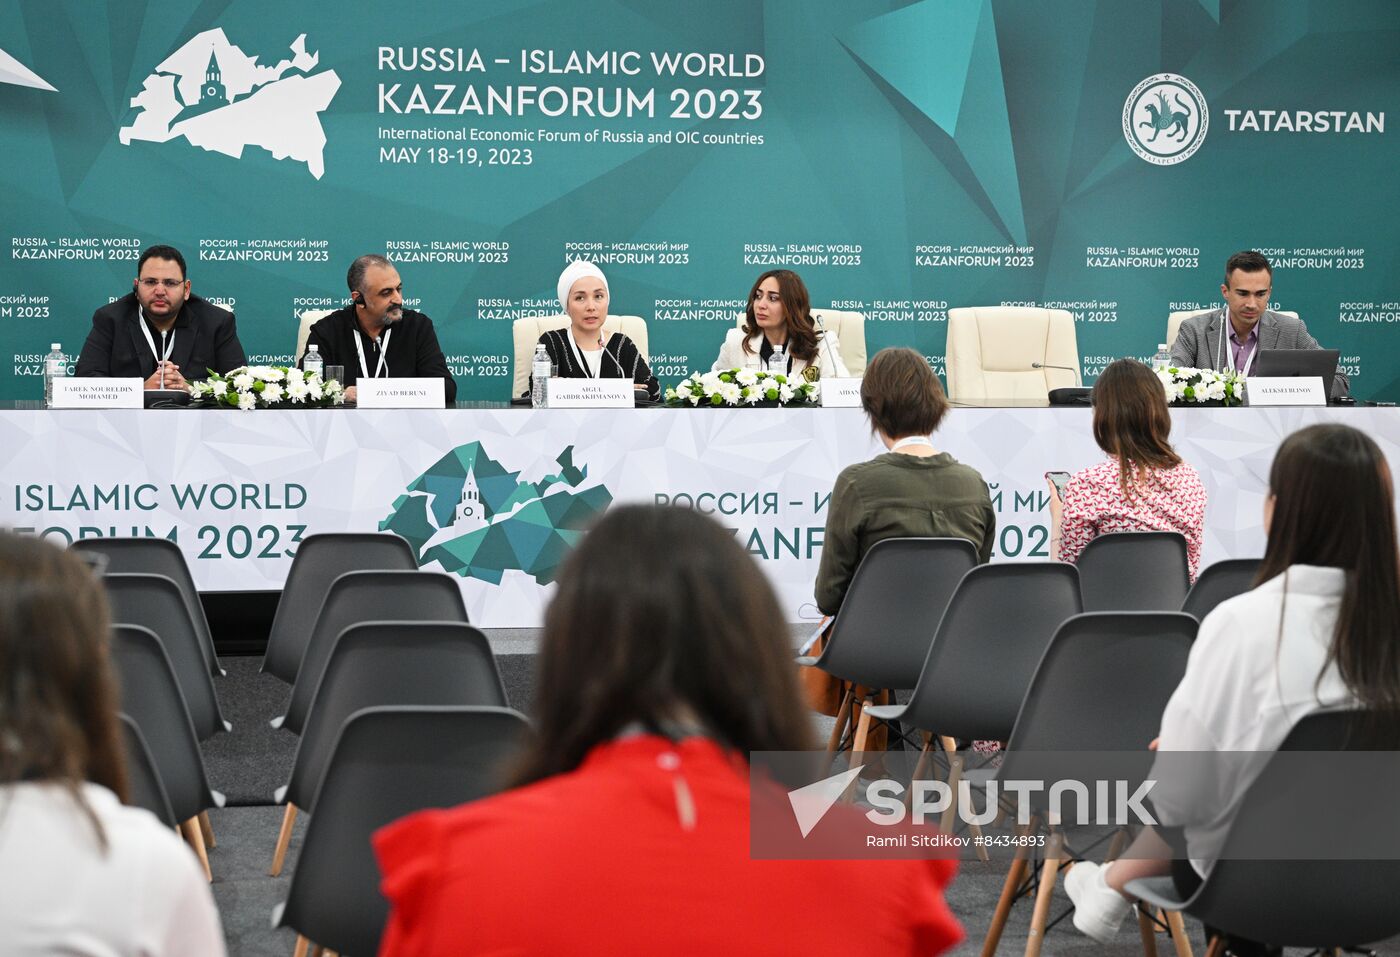 KAZANFORUM 2023. Press conference on the opening of 9th Kazan Forum of Young Entrepreneurs of OIC Countries